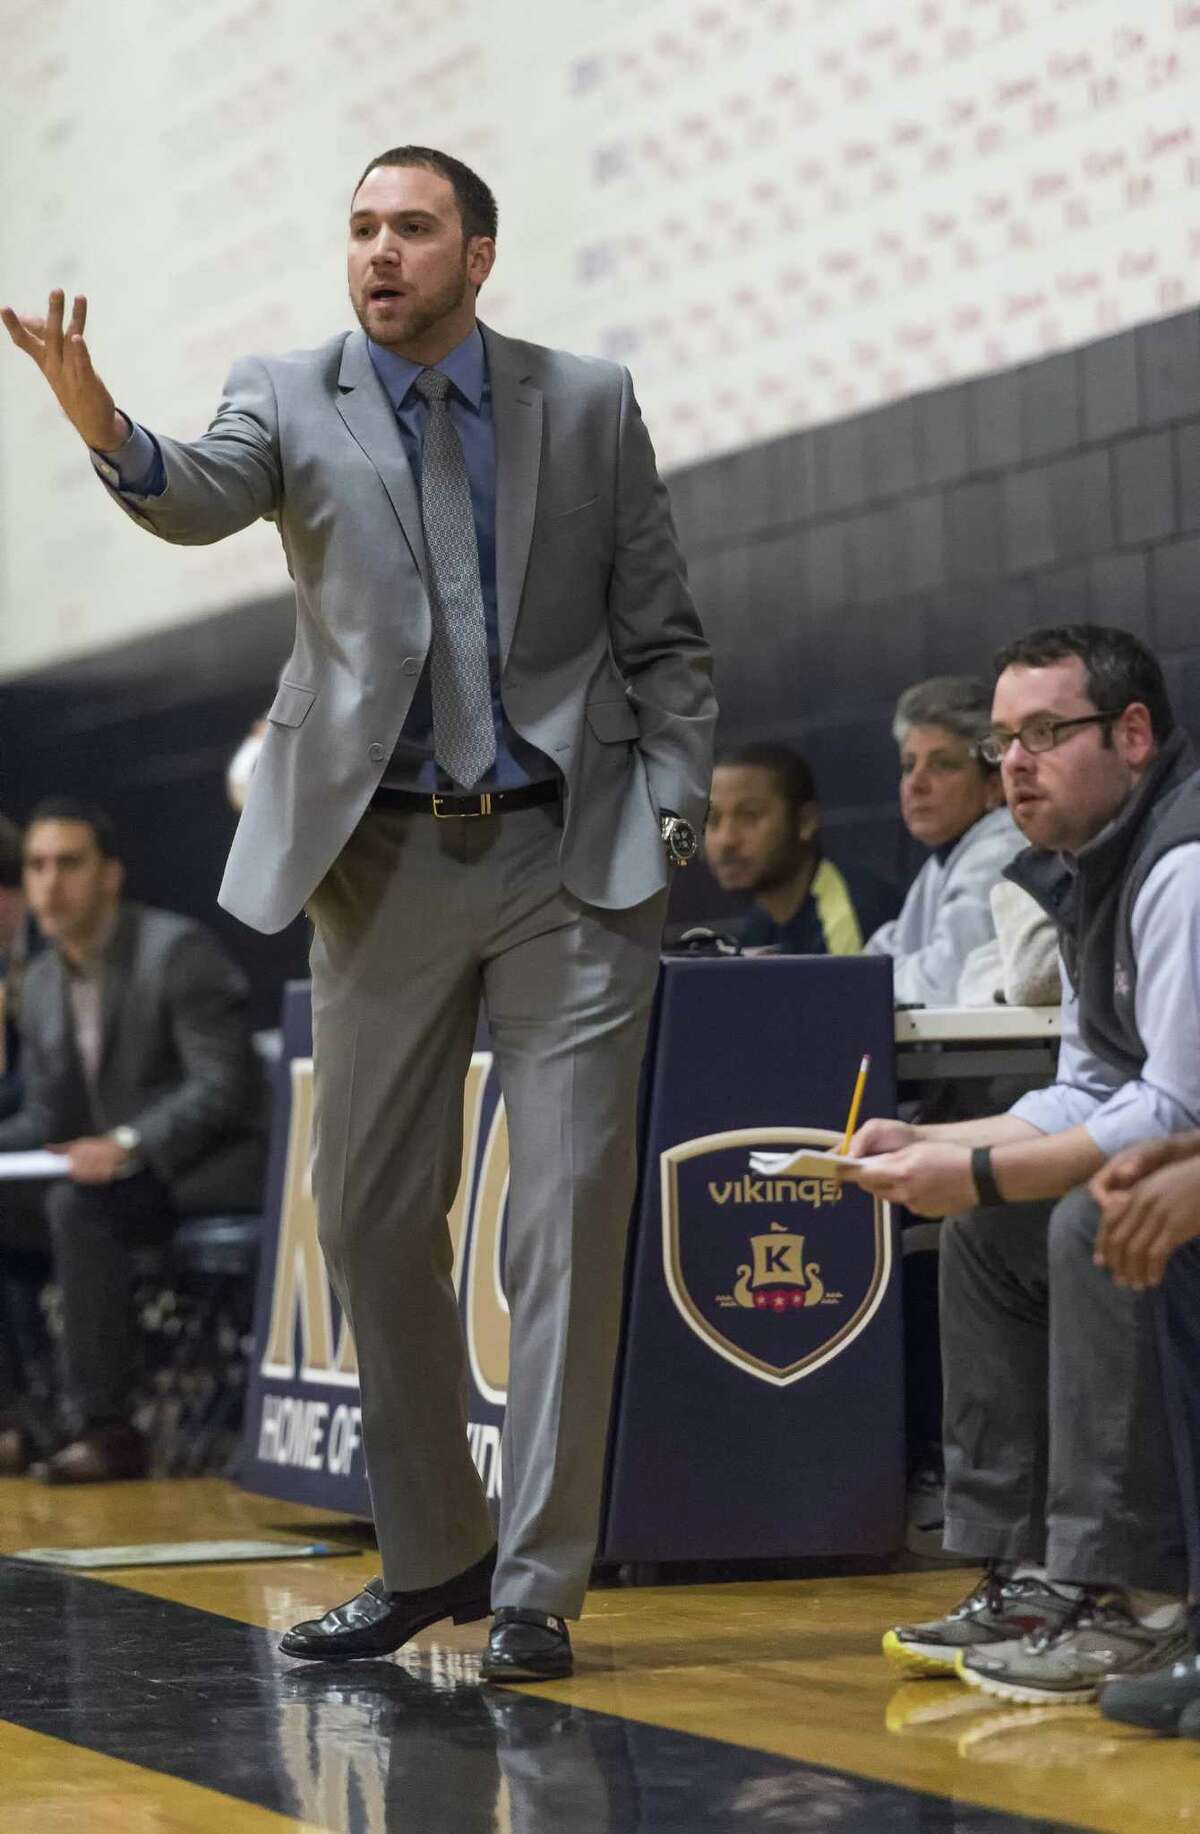 St Luke's School head coach Drew Gladstone during a boys basketball game against King School played at King School, Stamford, CT Thursday, December 10, 2015.